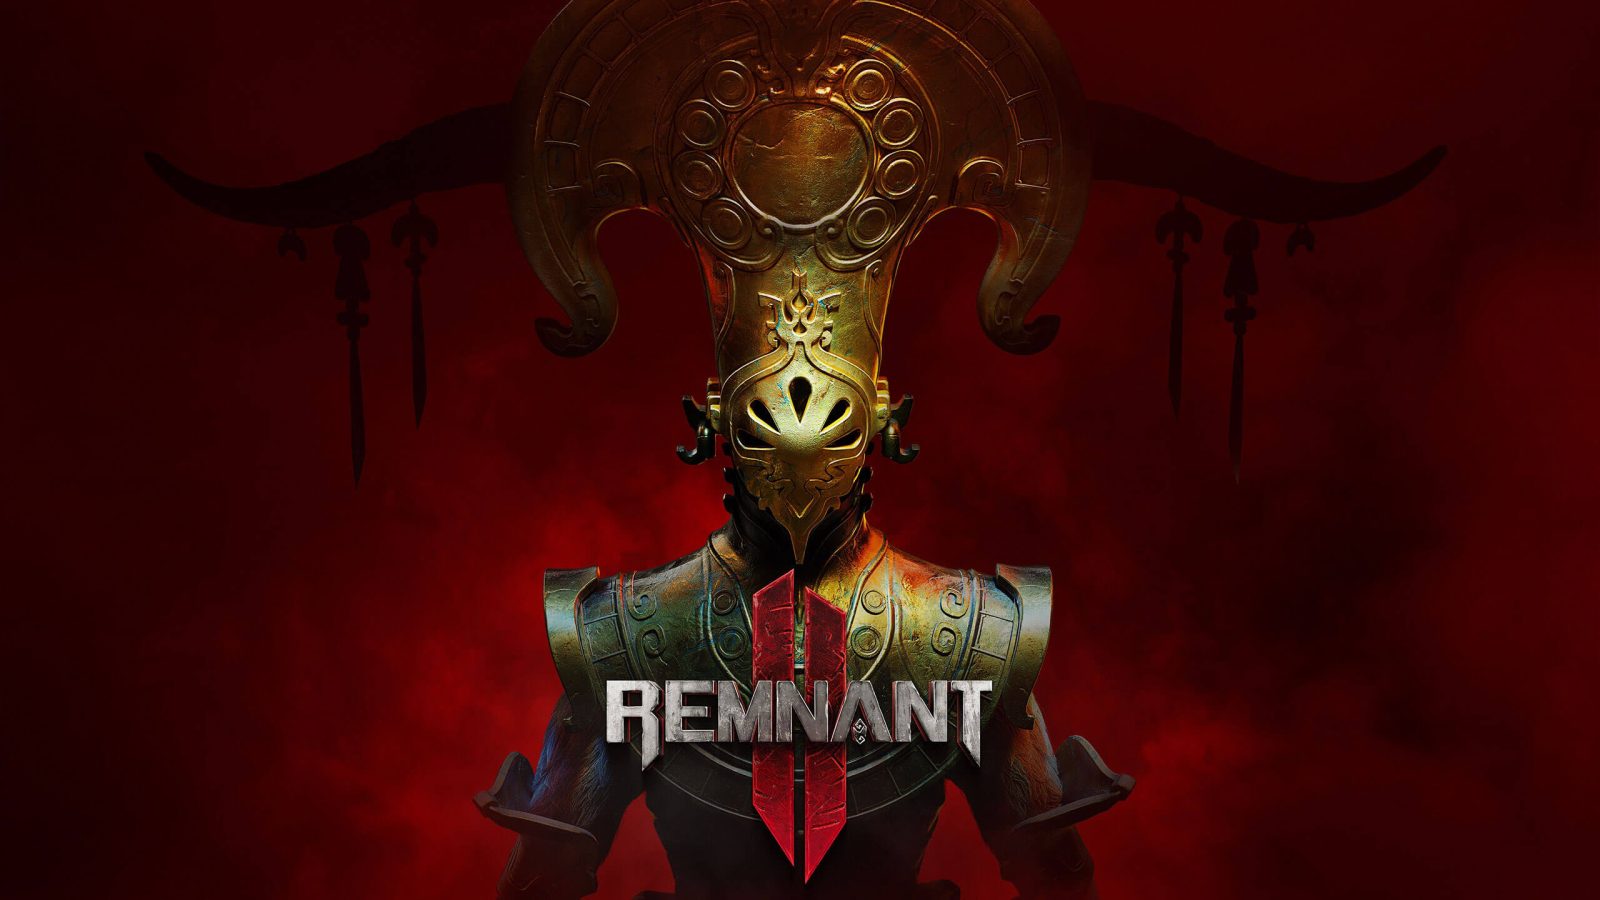 Remnant 2 is shaping up to be better than the original in every way